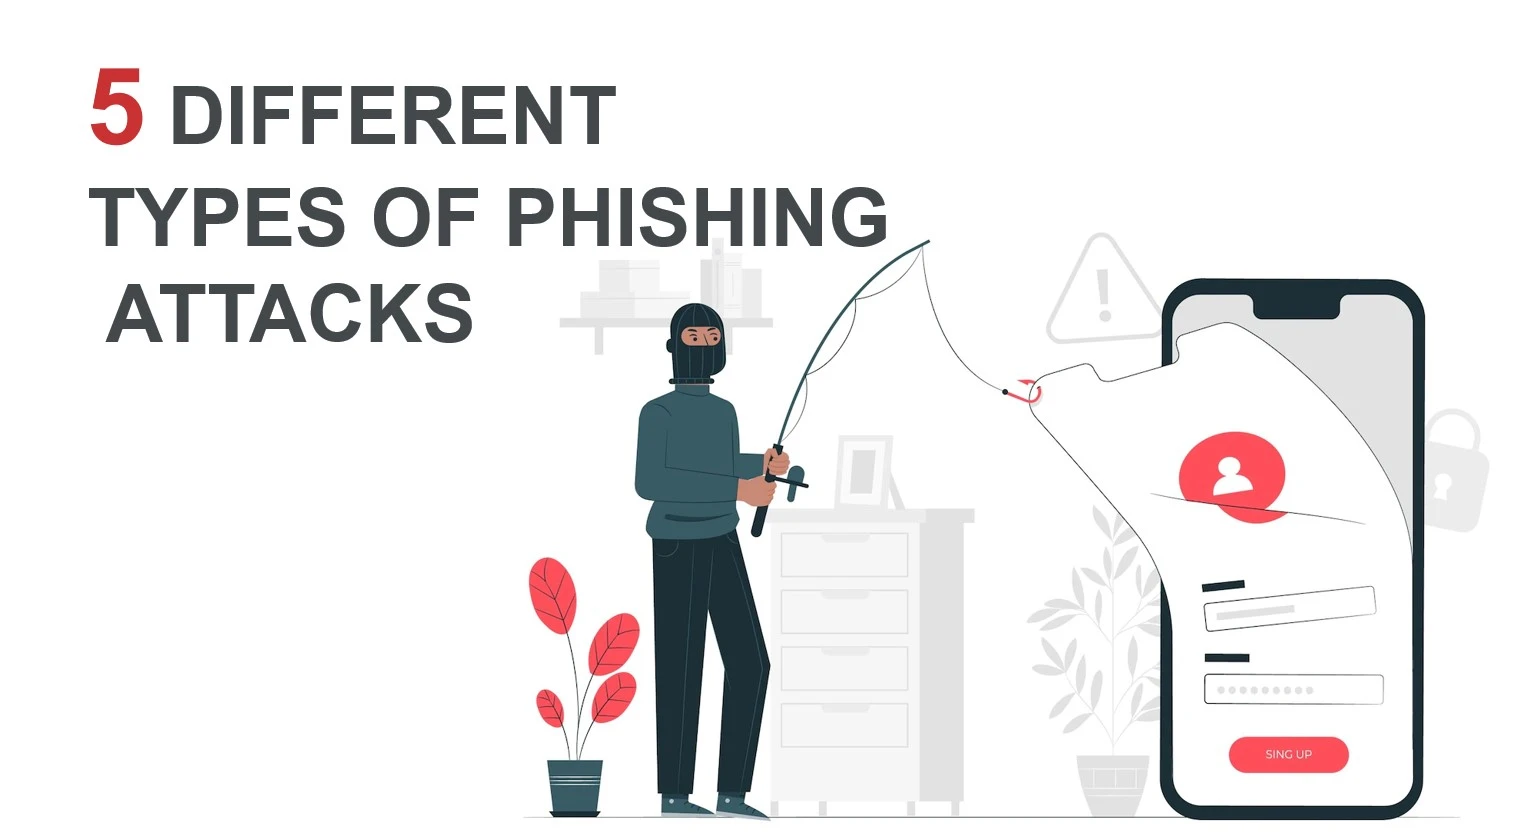 5 Different Types Of Phishing Attacks